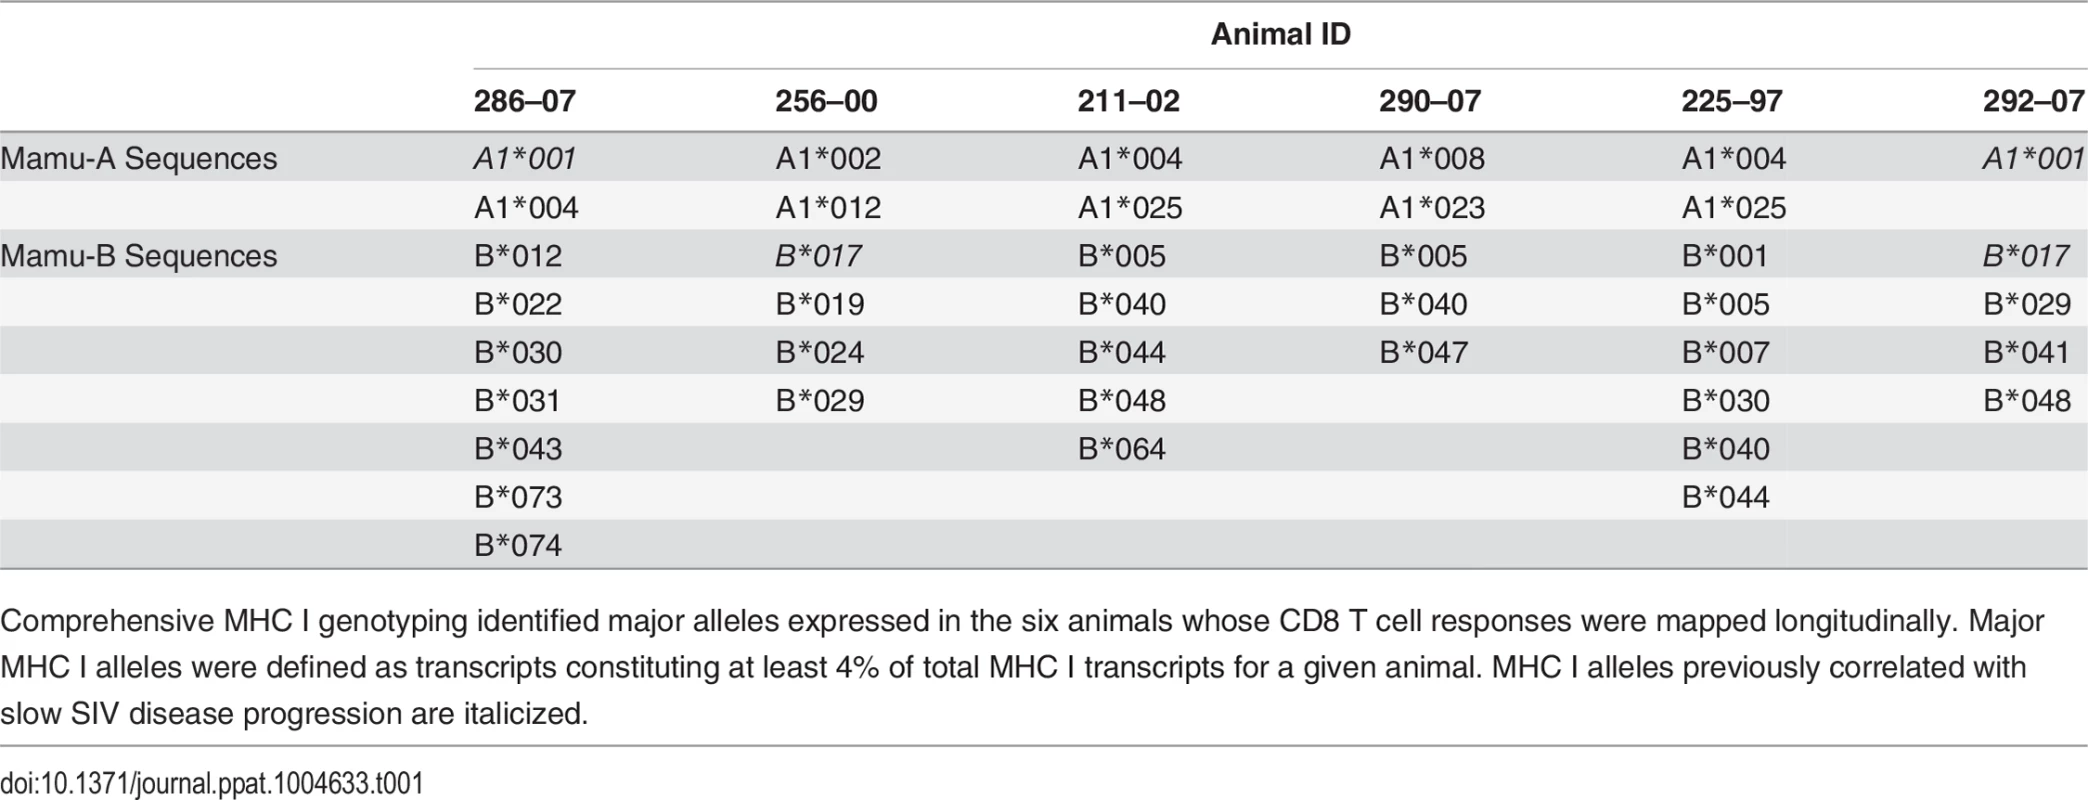 Major alleles expressed as determined by MHC I genotyping.